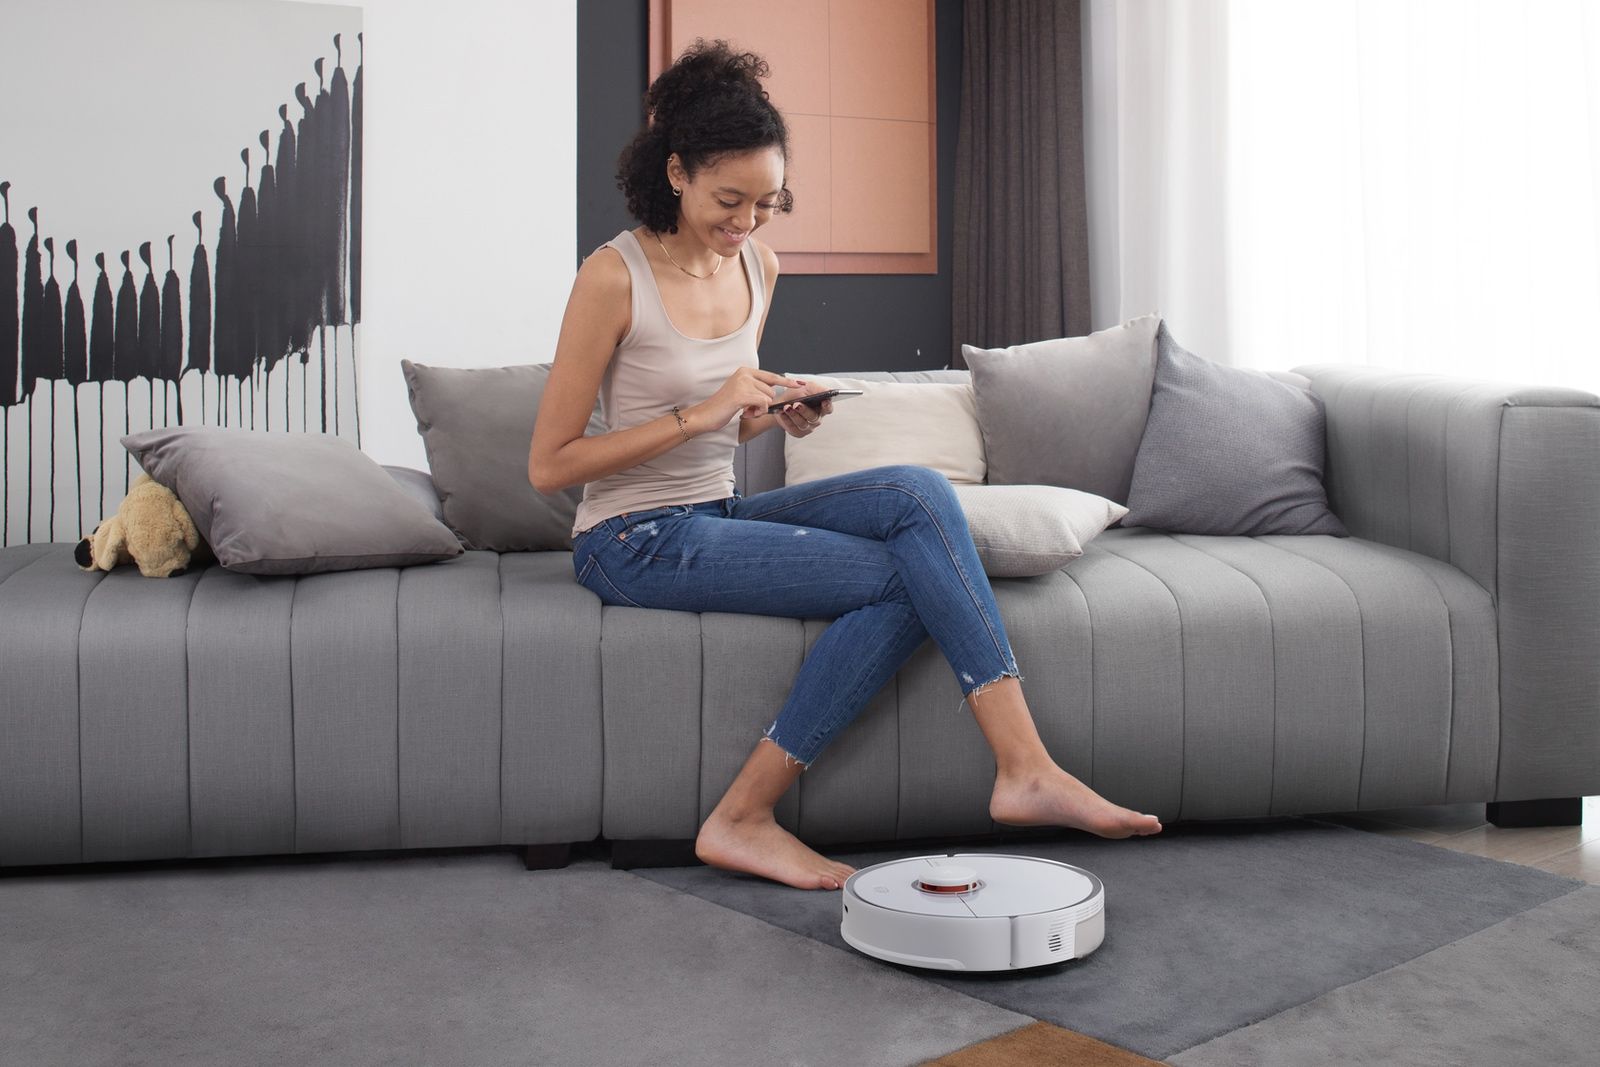 Roborock makes some of the best value vacuums you can buy - but who are they image 1